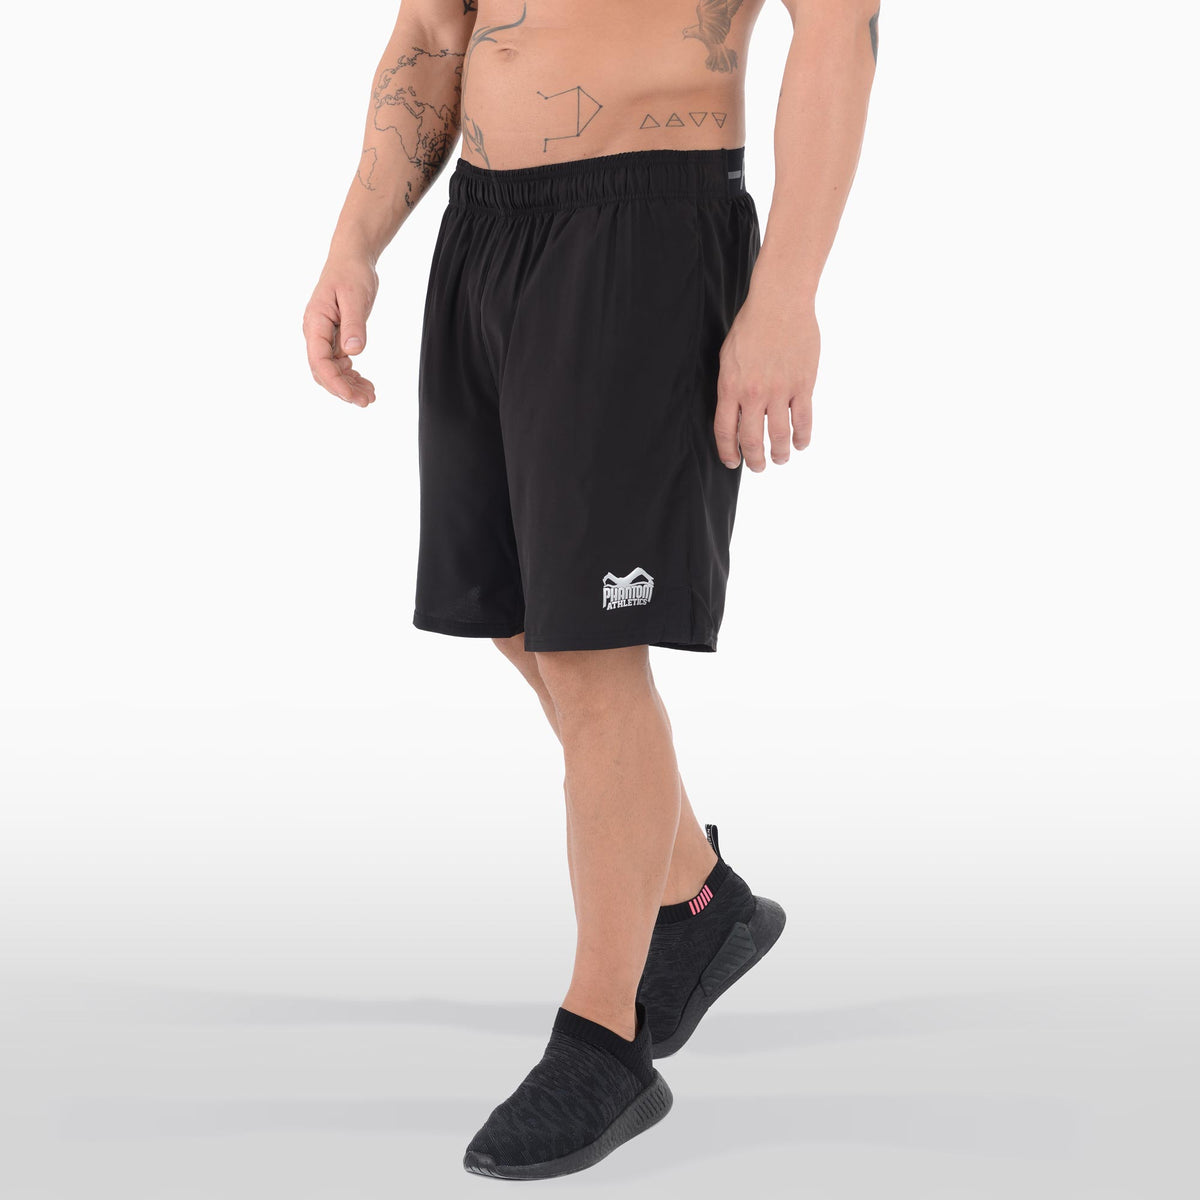 The Phantom Tactic training shorts for martial arts and fitness